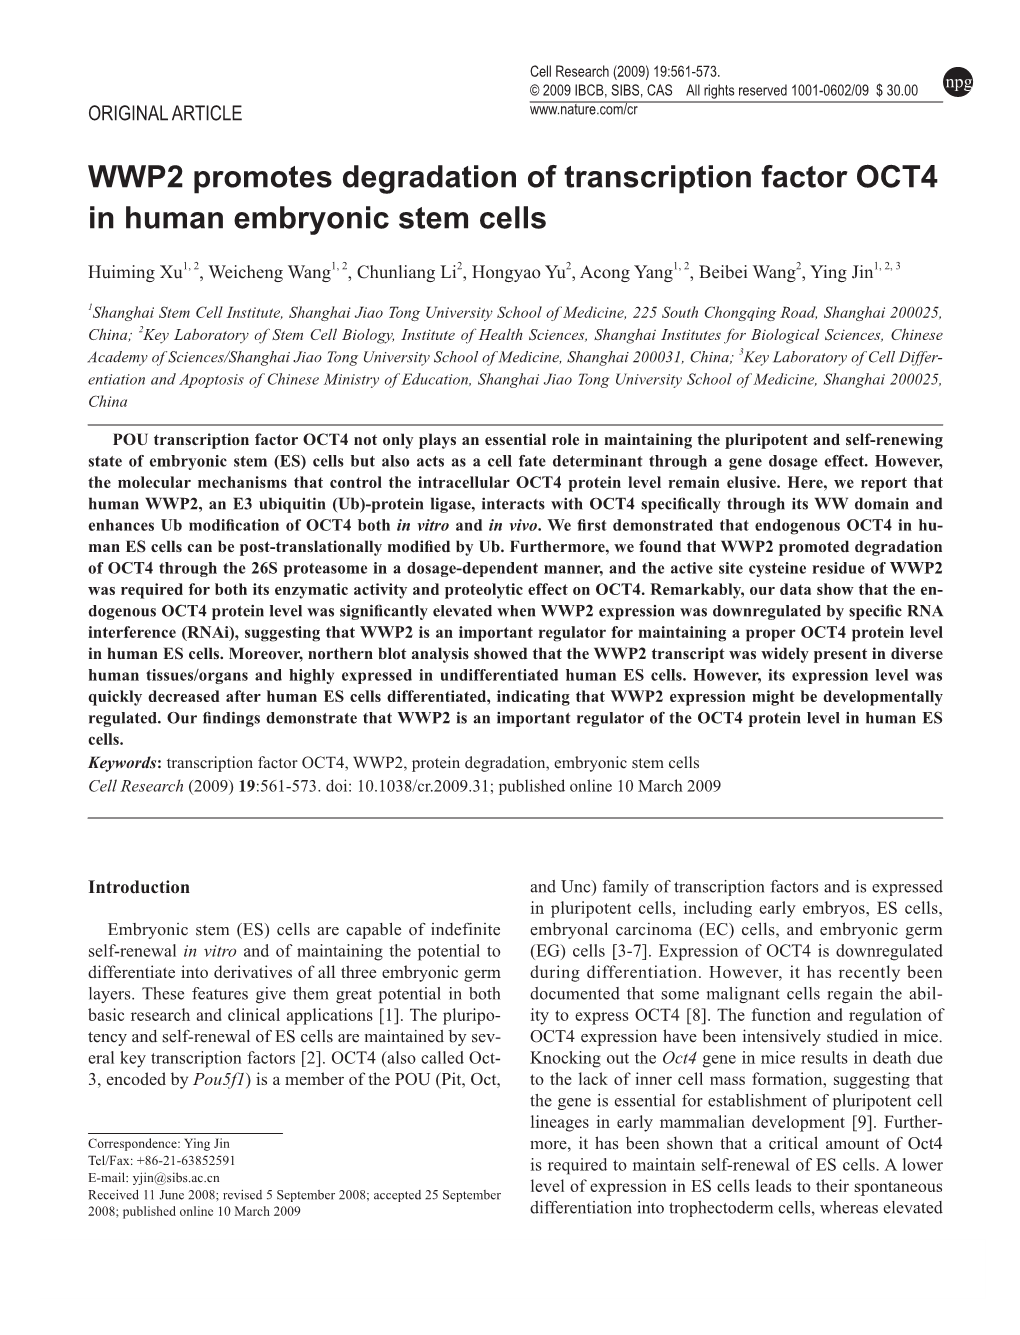 WWP2 Promotes Degradation of Transcription Factor OCT4 in Human Embryonic Stem Cells